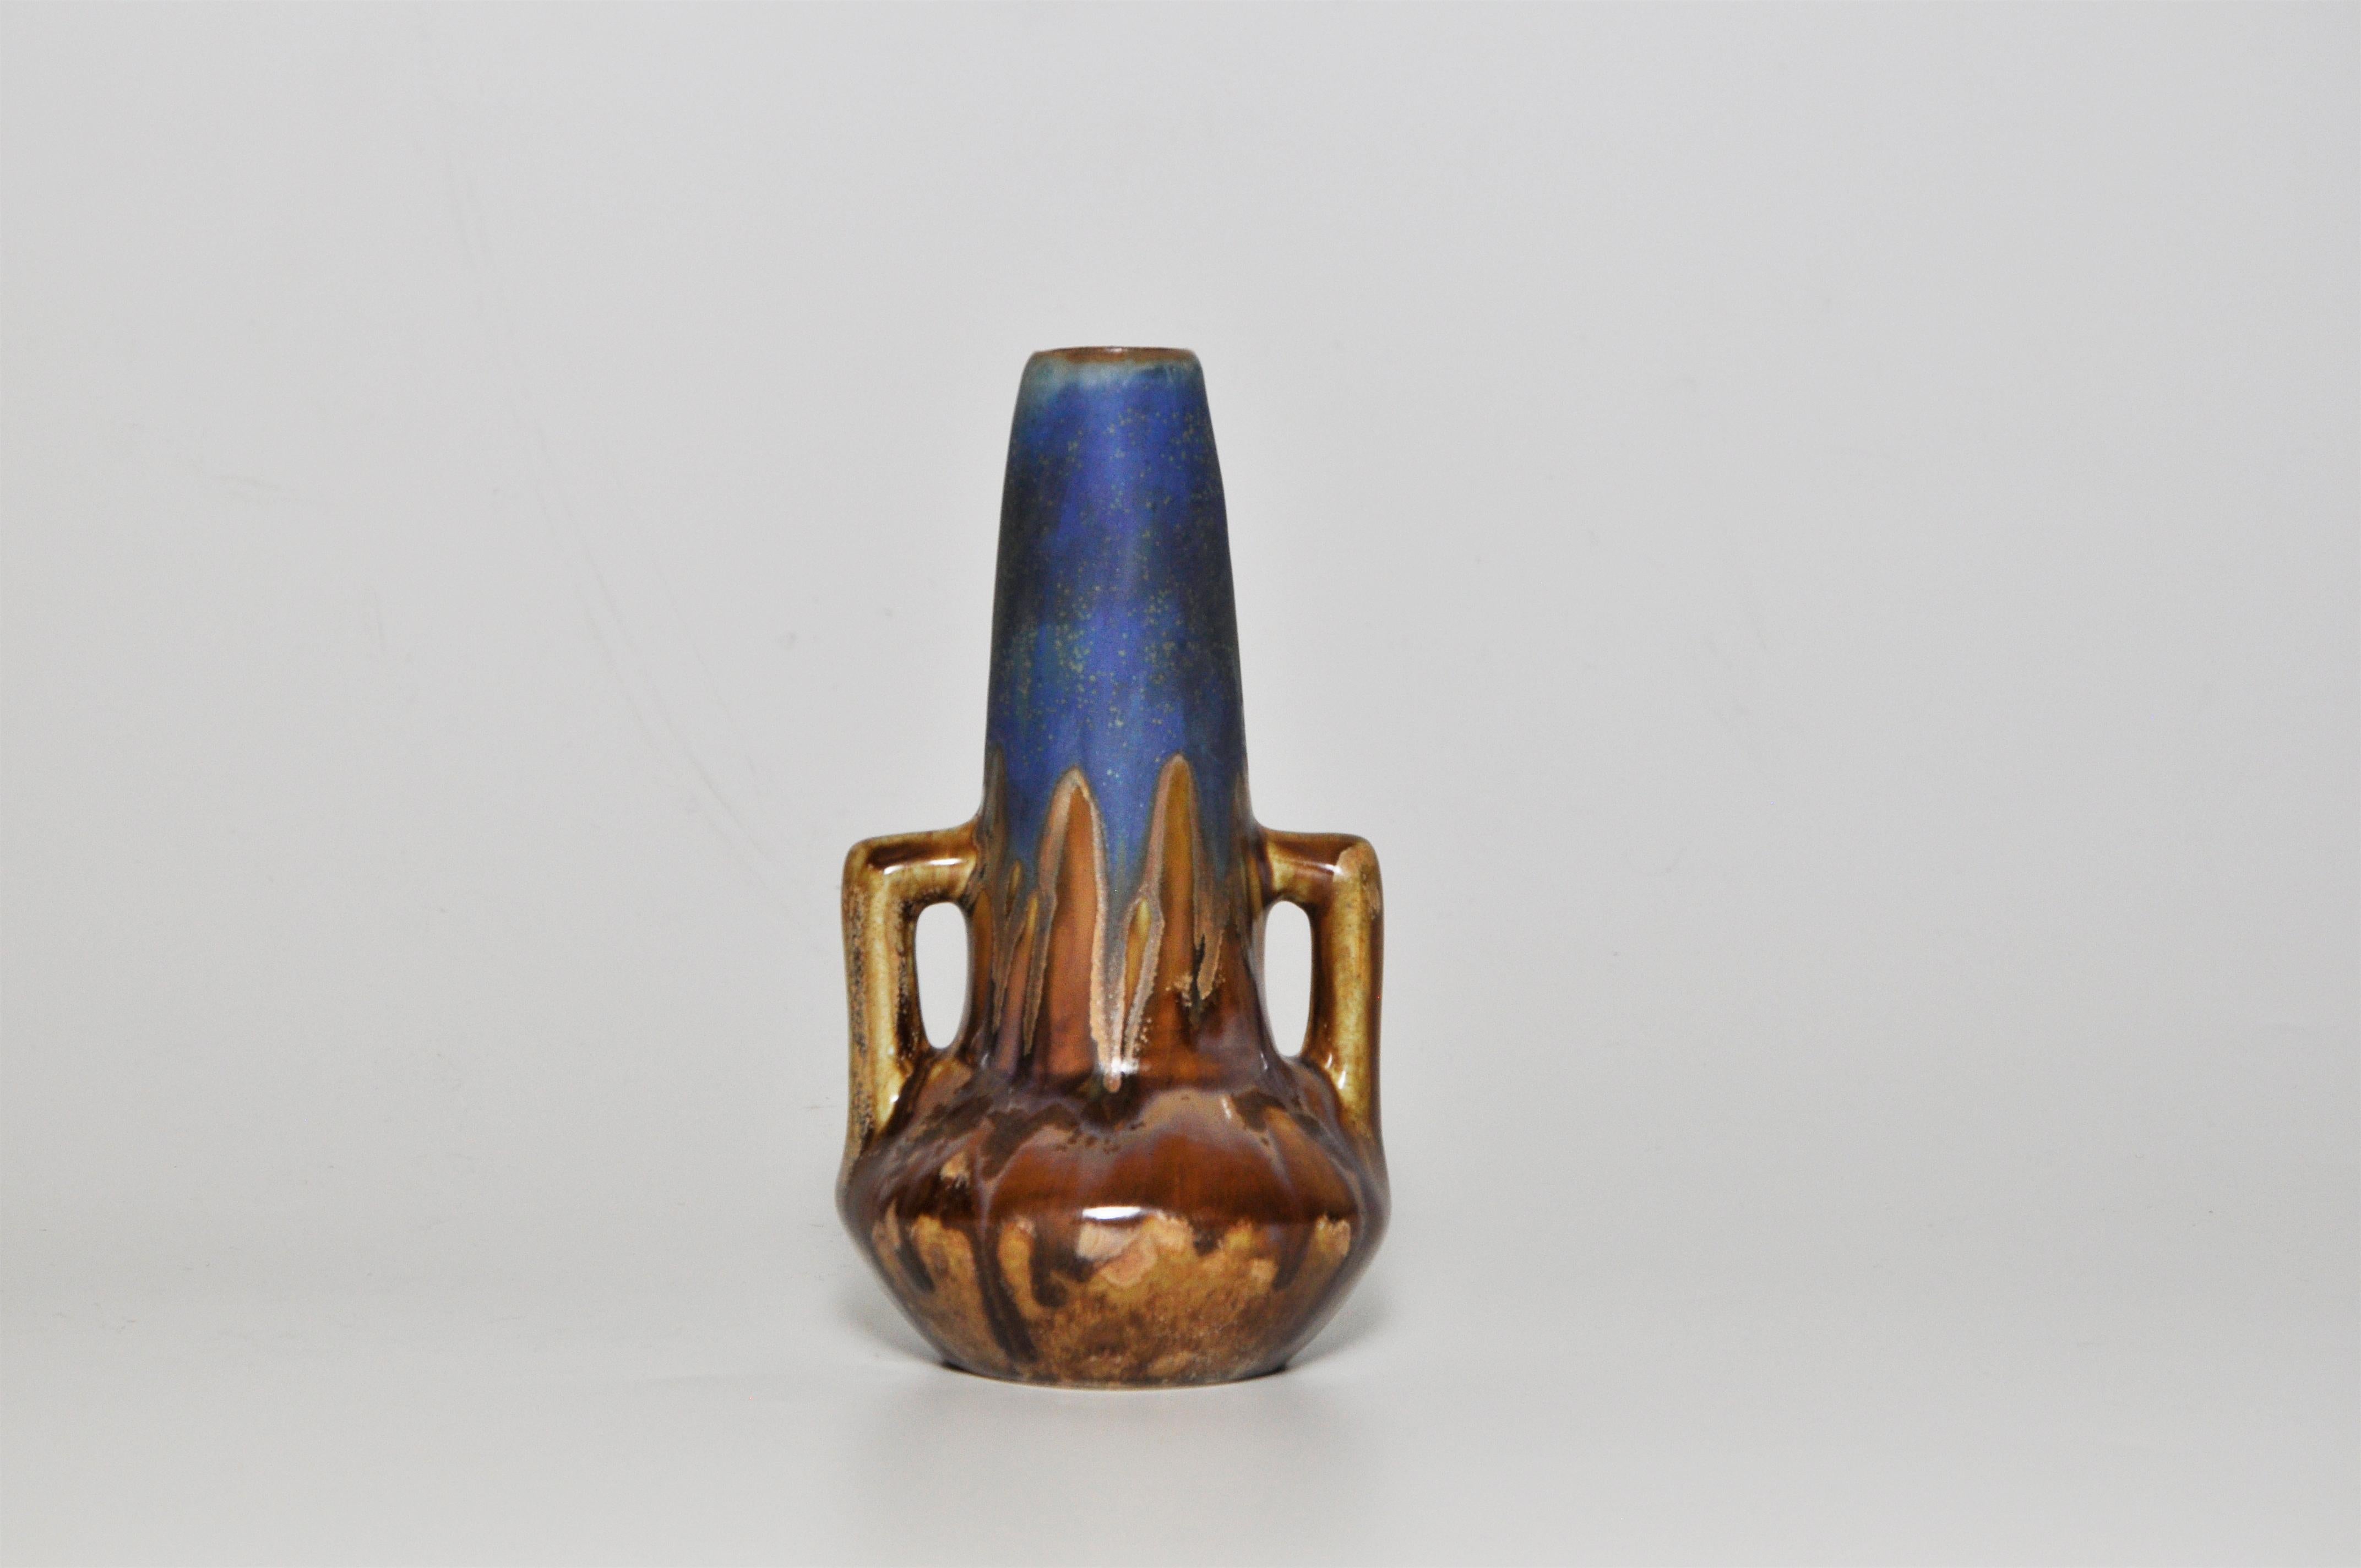 French Art Pottery Metenier blue ceramic vase pot

Made from stoneware and signed on the base by ‘G.Métenier’ for Gilbert Metenier. An artist potter who worked from 1907 until 1940 noted for his variety of shapes and interesting experimental glaze